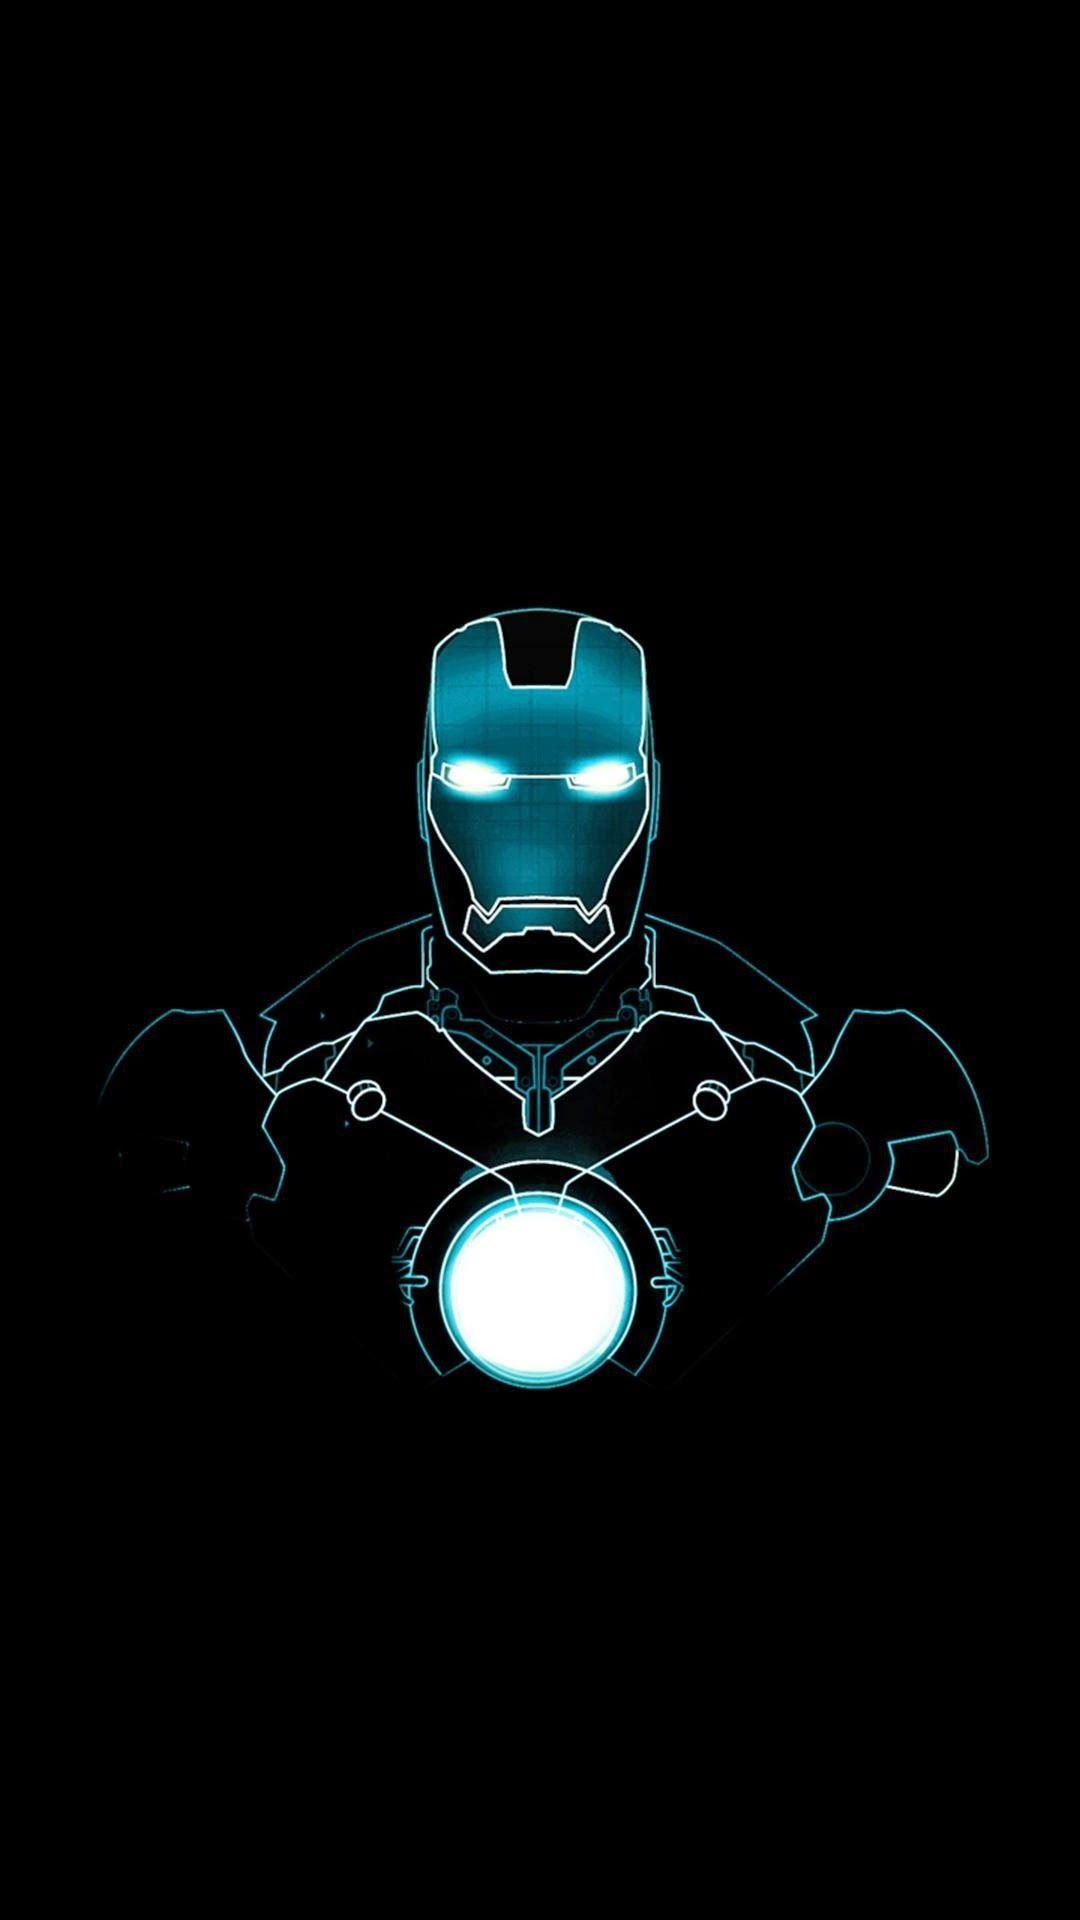 Iron Man Suit Android Wallpaper. (Best Andro Wallpaper)